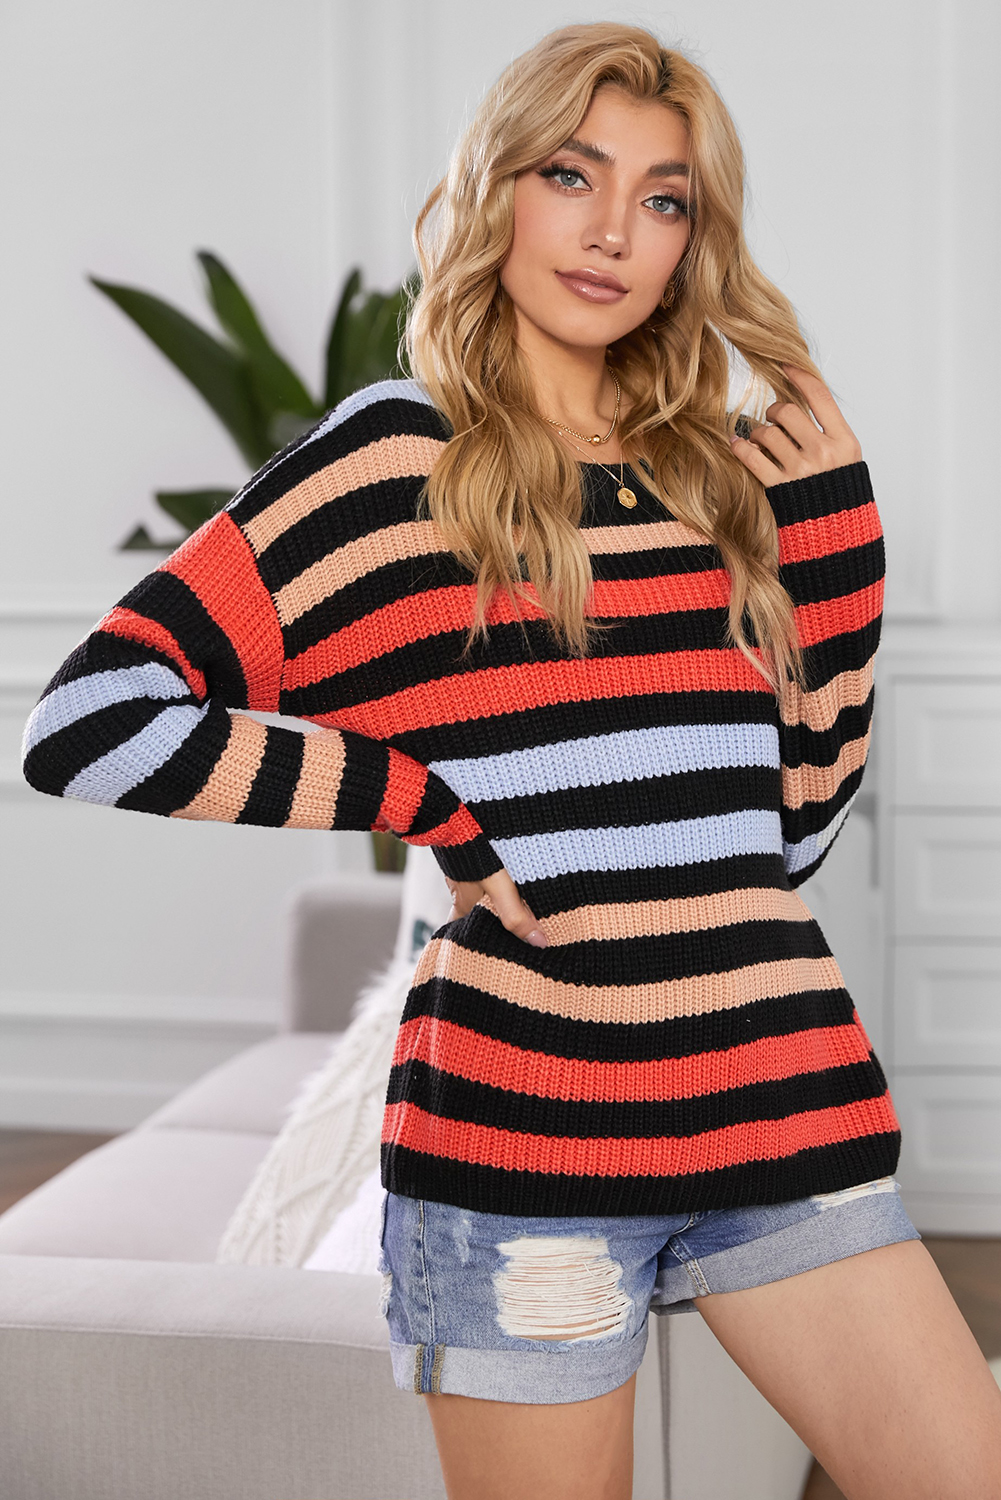 Stockpapa Ladies striped casual sweateres 